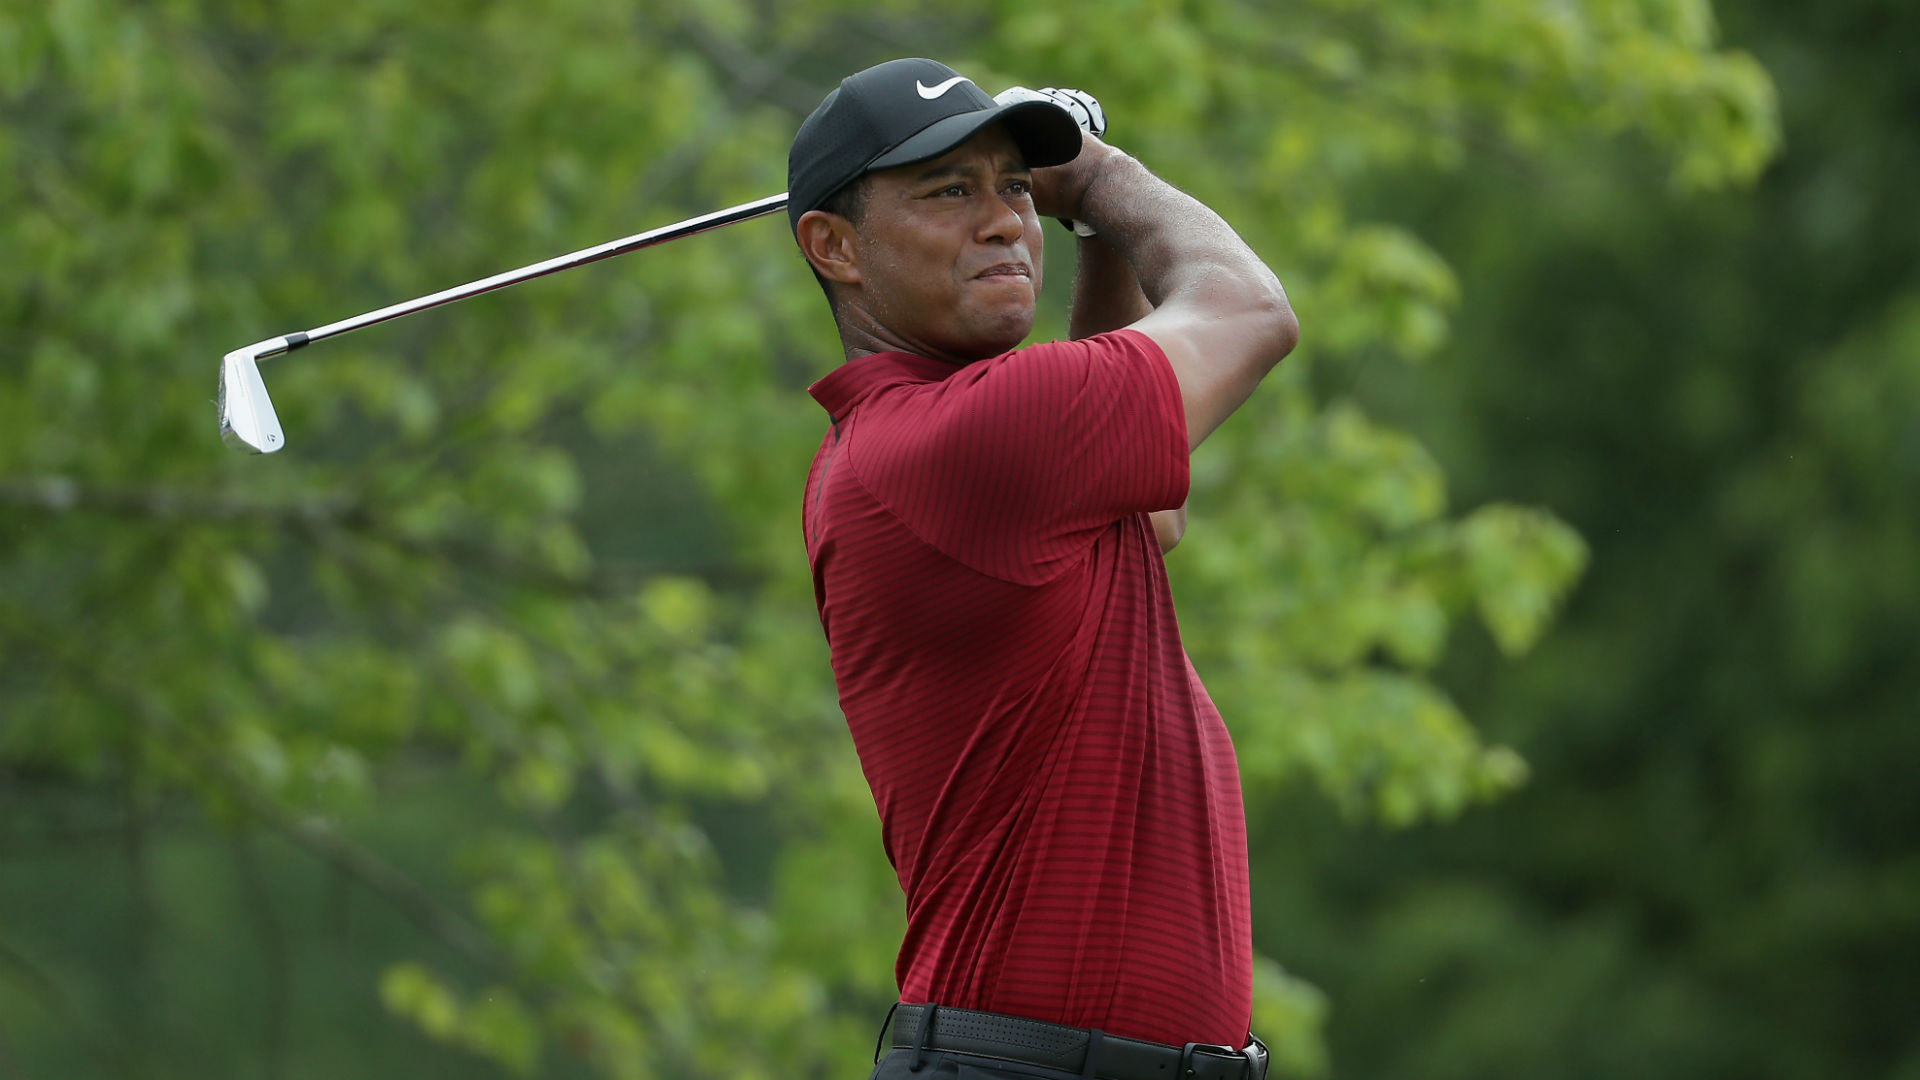 Tiger Woods score: Round 4 live updates, highlights from PGA Championship | Golf ...1920 x 1080